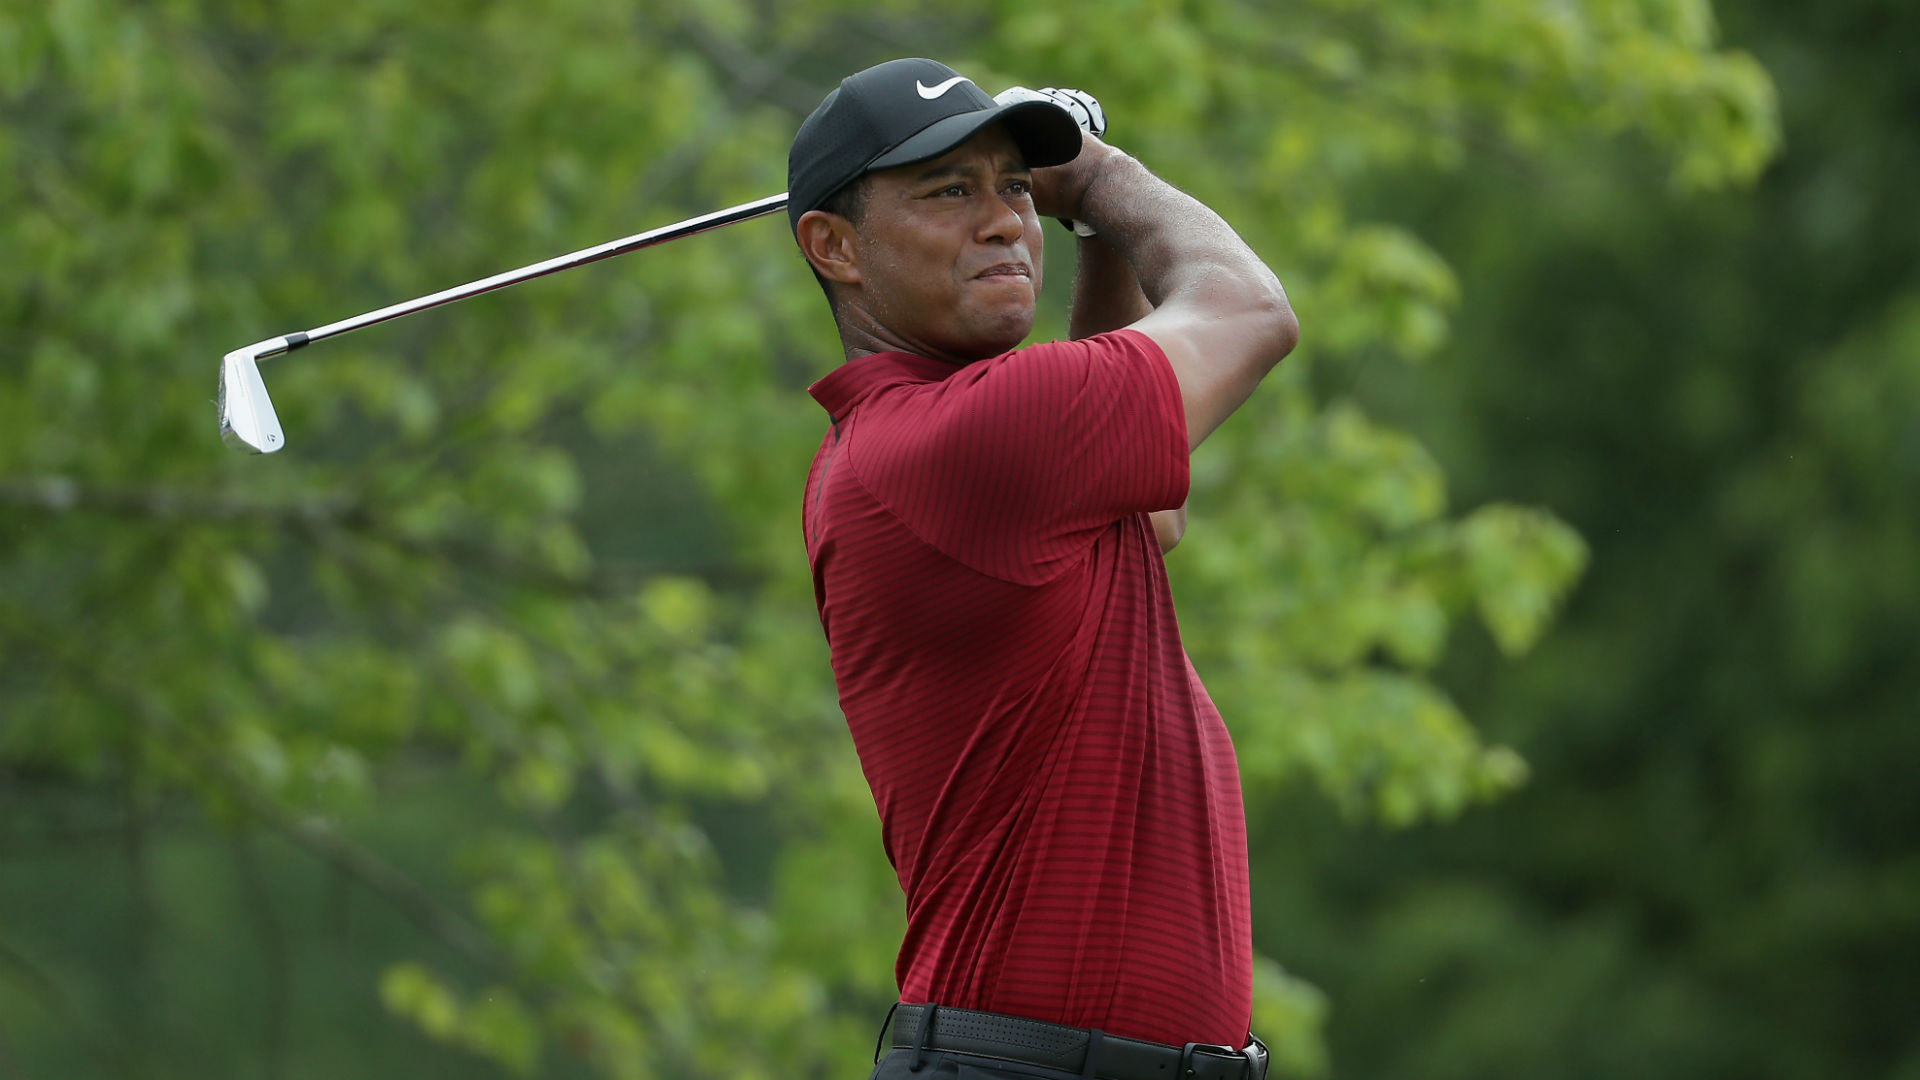 Tiger Woods score: Round 4 live updates, highlights from PGA Championship | Golf ...1920 x 1080